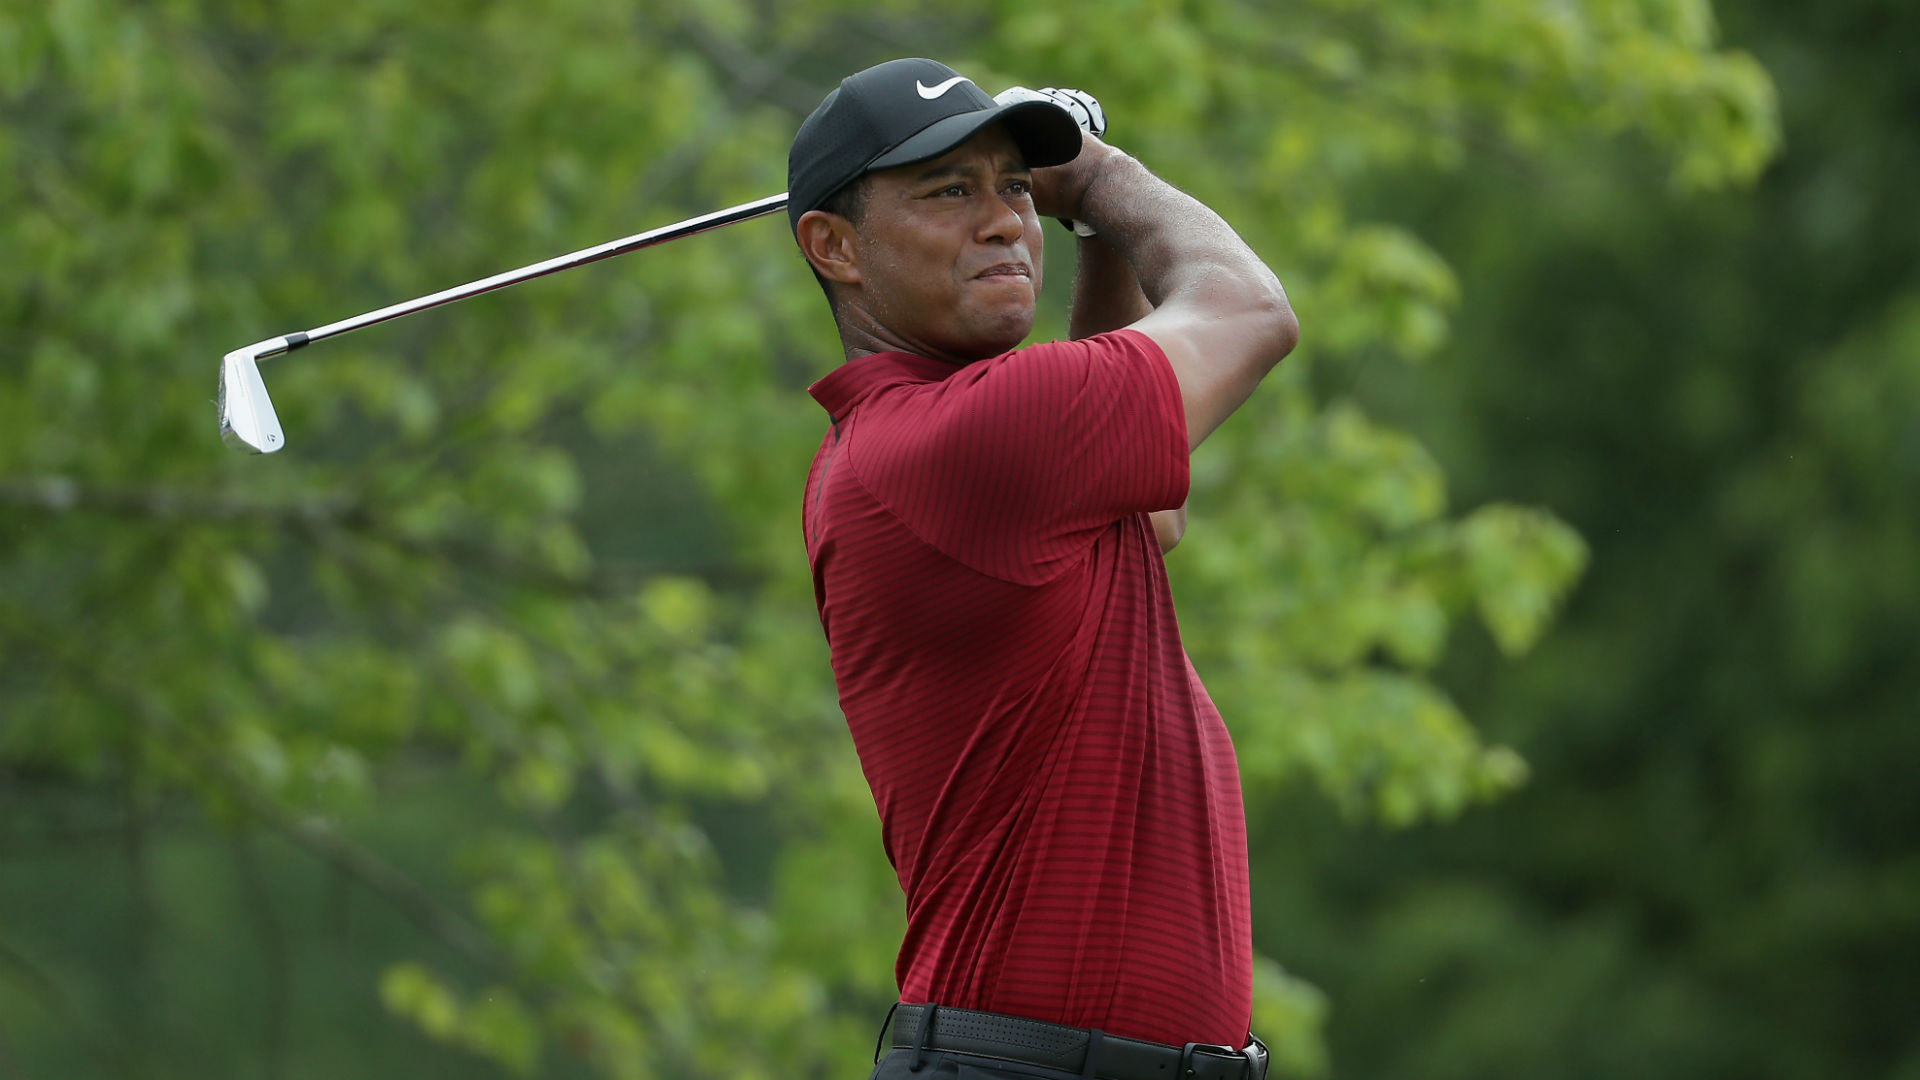 Tiger Woods score: Round 4 live updates, highlights from PGA Championship | Golf ...1920 x 1080